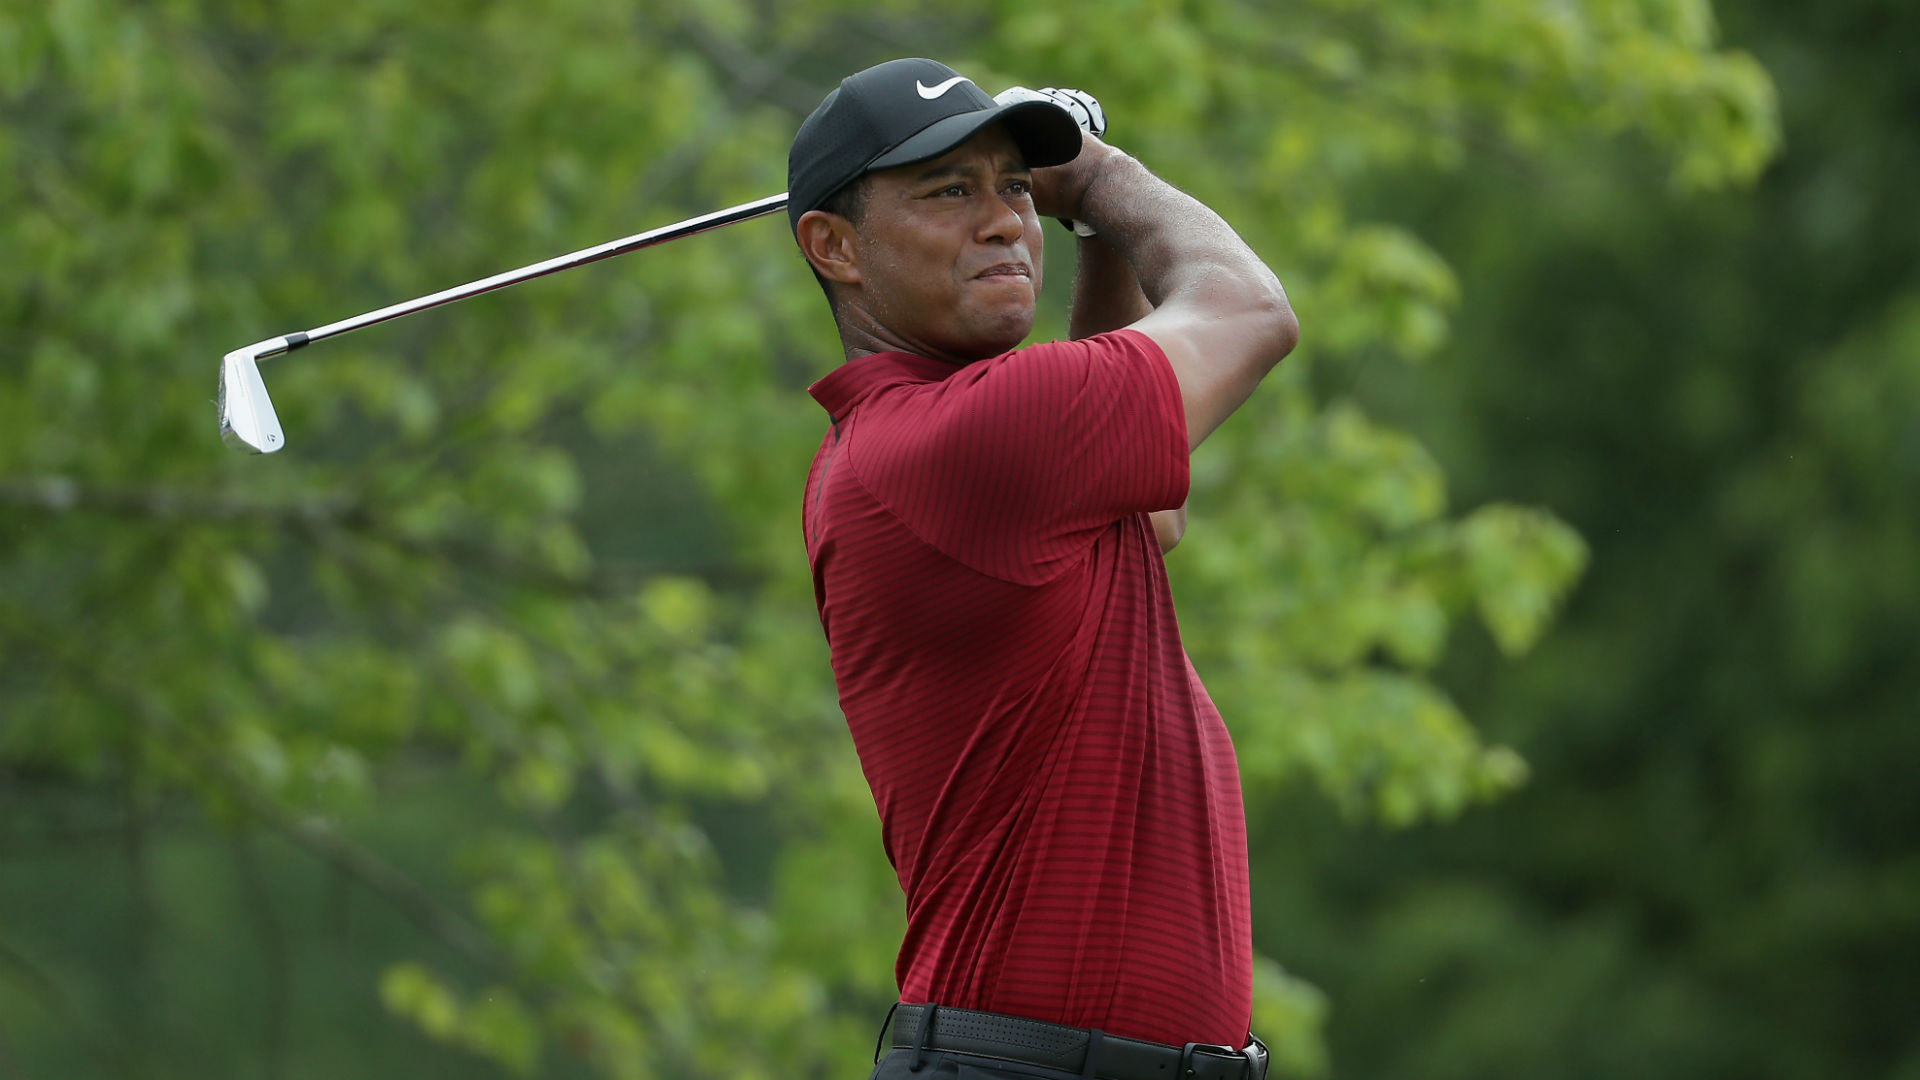 Tiger Woods score: Round 4 live updates, highlights from PGA Championship | Golf ...1920 x 1080